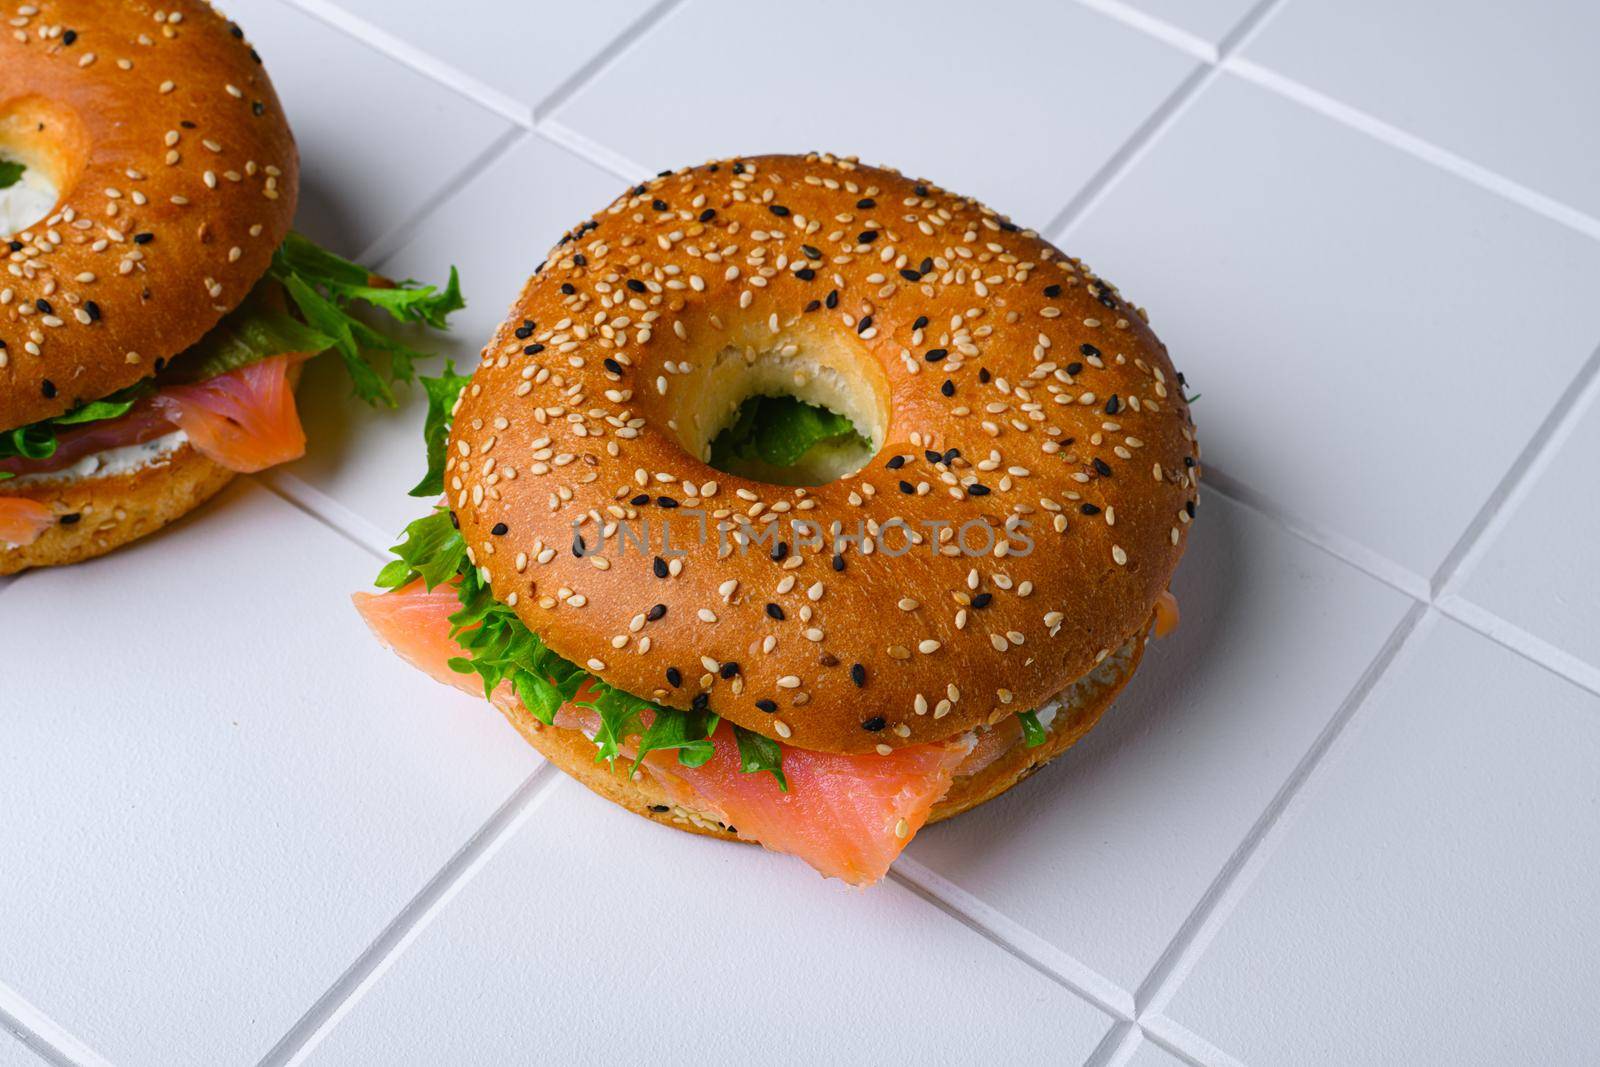 Cream cheese and smoked salmon bagel set, on white ceramic squared tile table background, with copy space for text